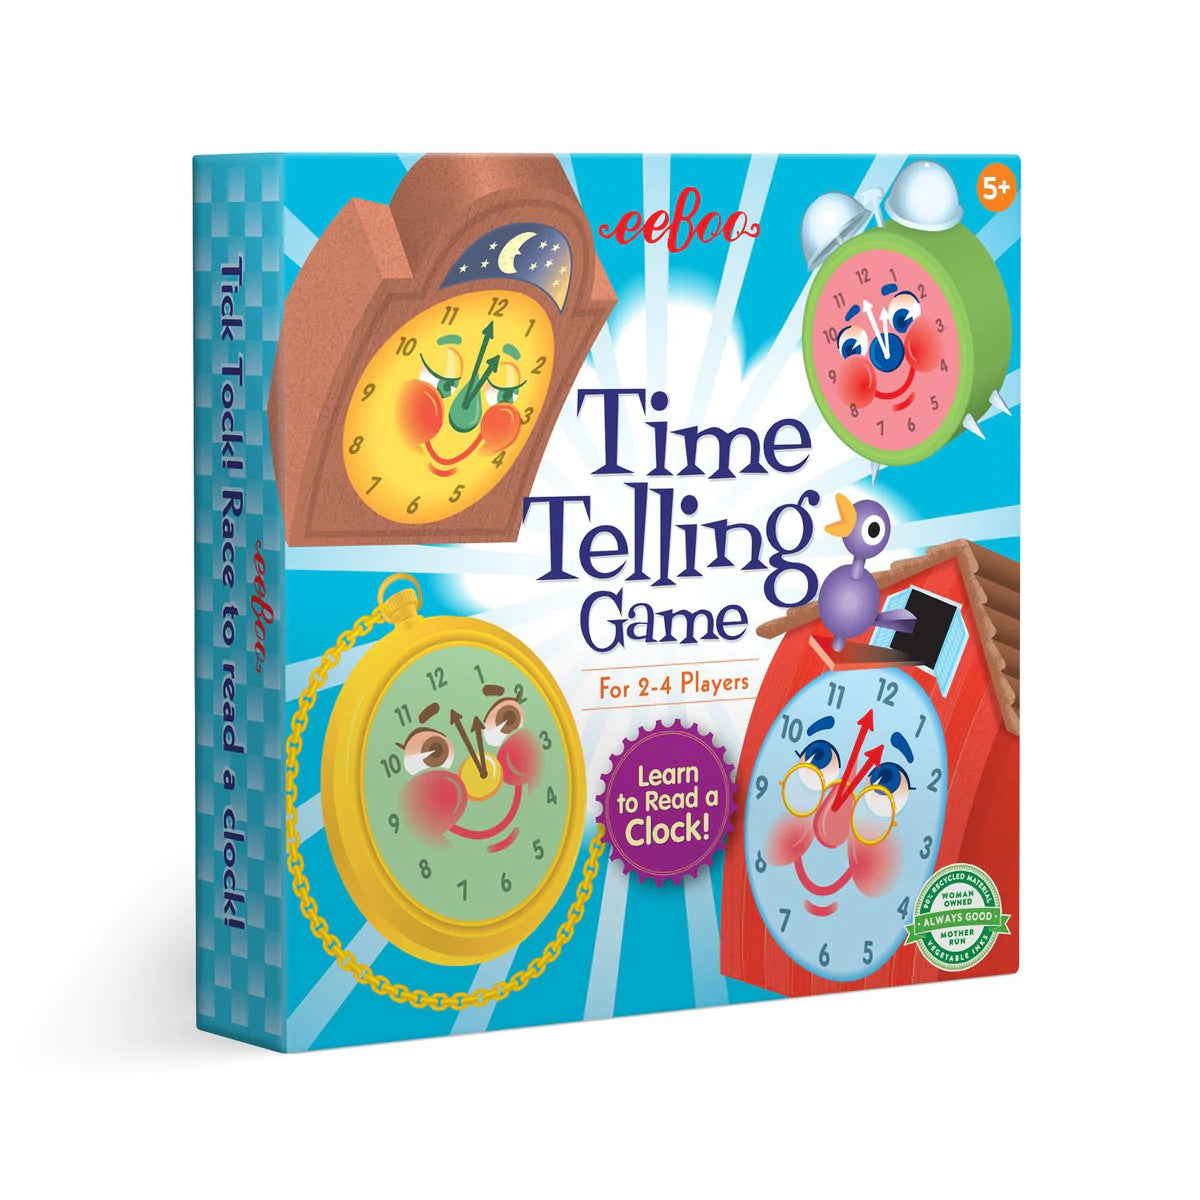 Time Telling Game by eeBoo